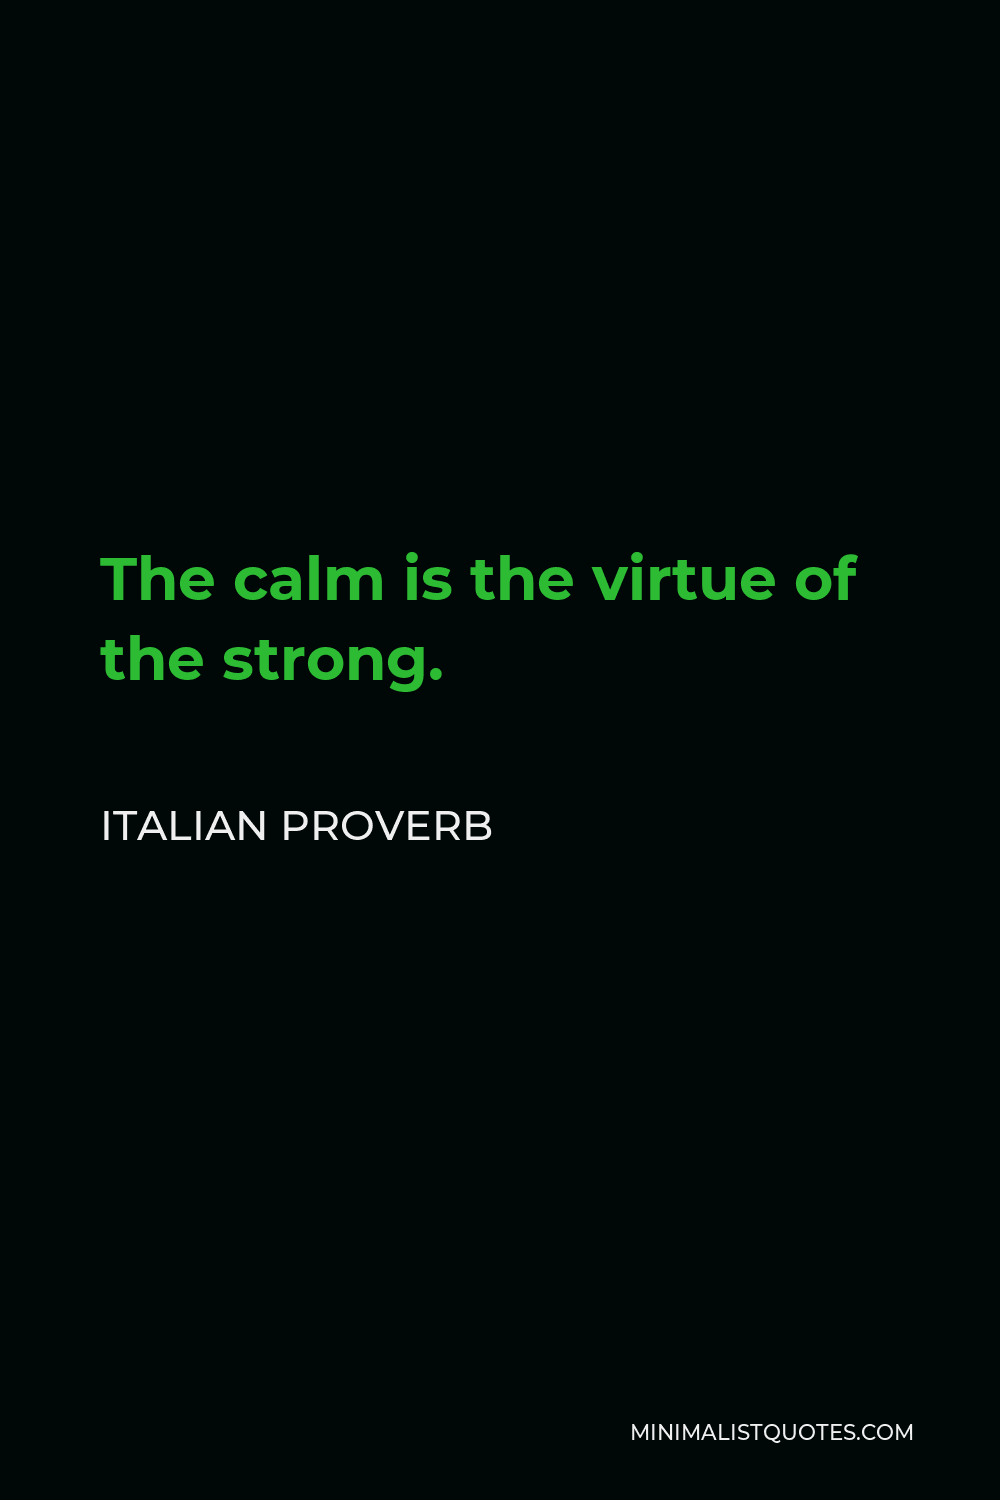 Italian Proverb Quote - The calm is the virtue of the strong.